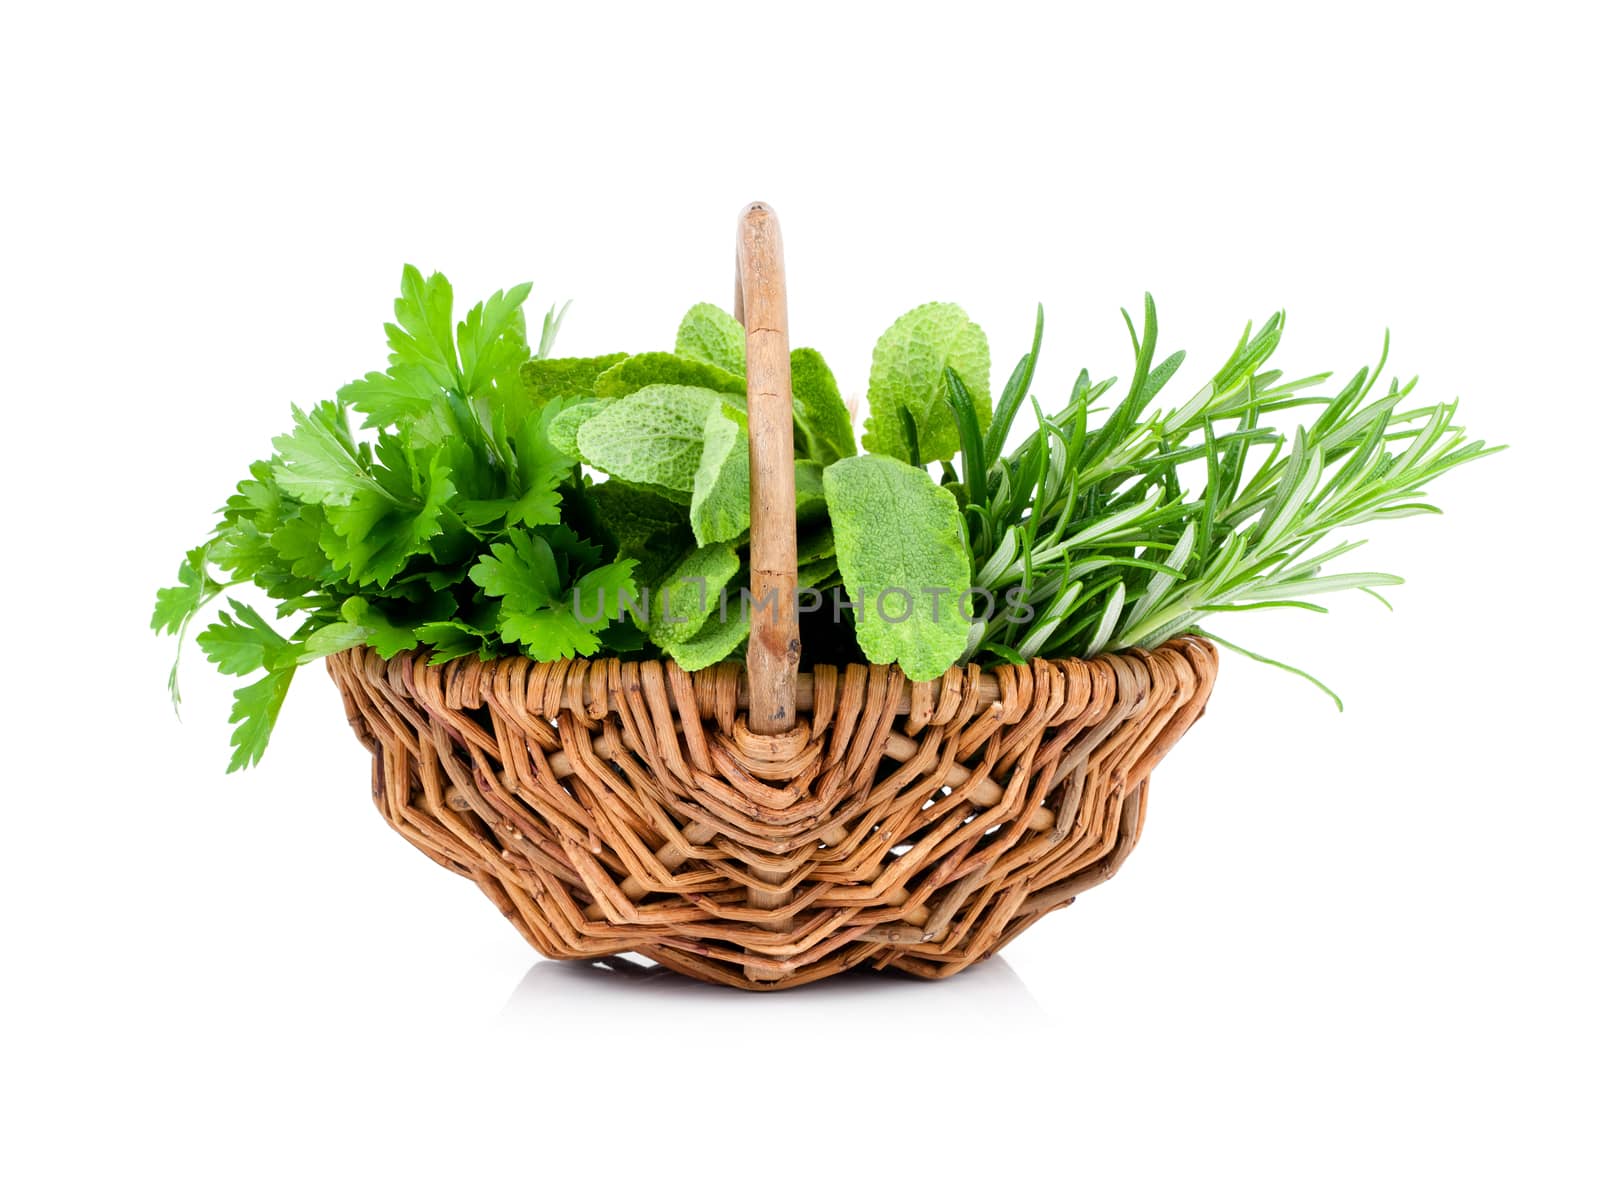 sage, parsley and rosemary in wicker basket, on a white background